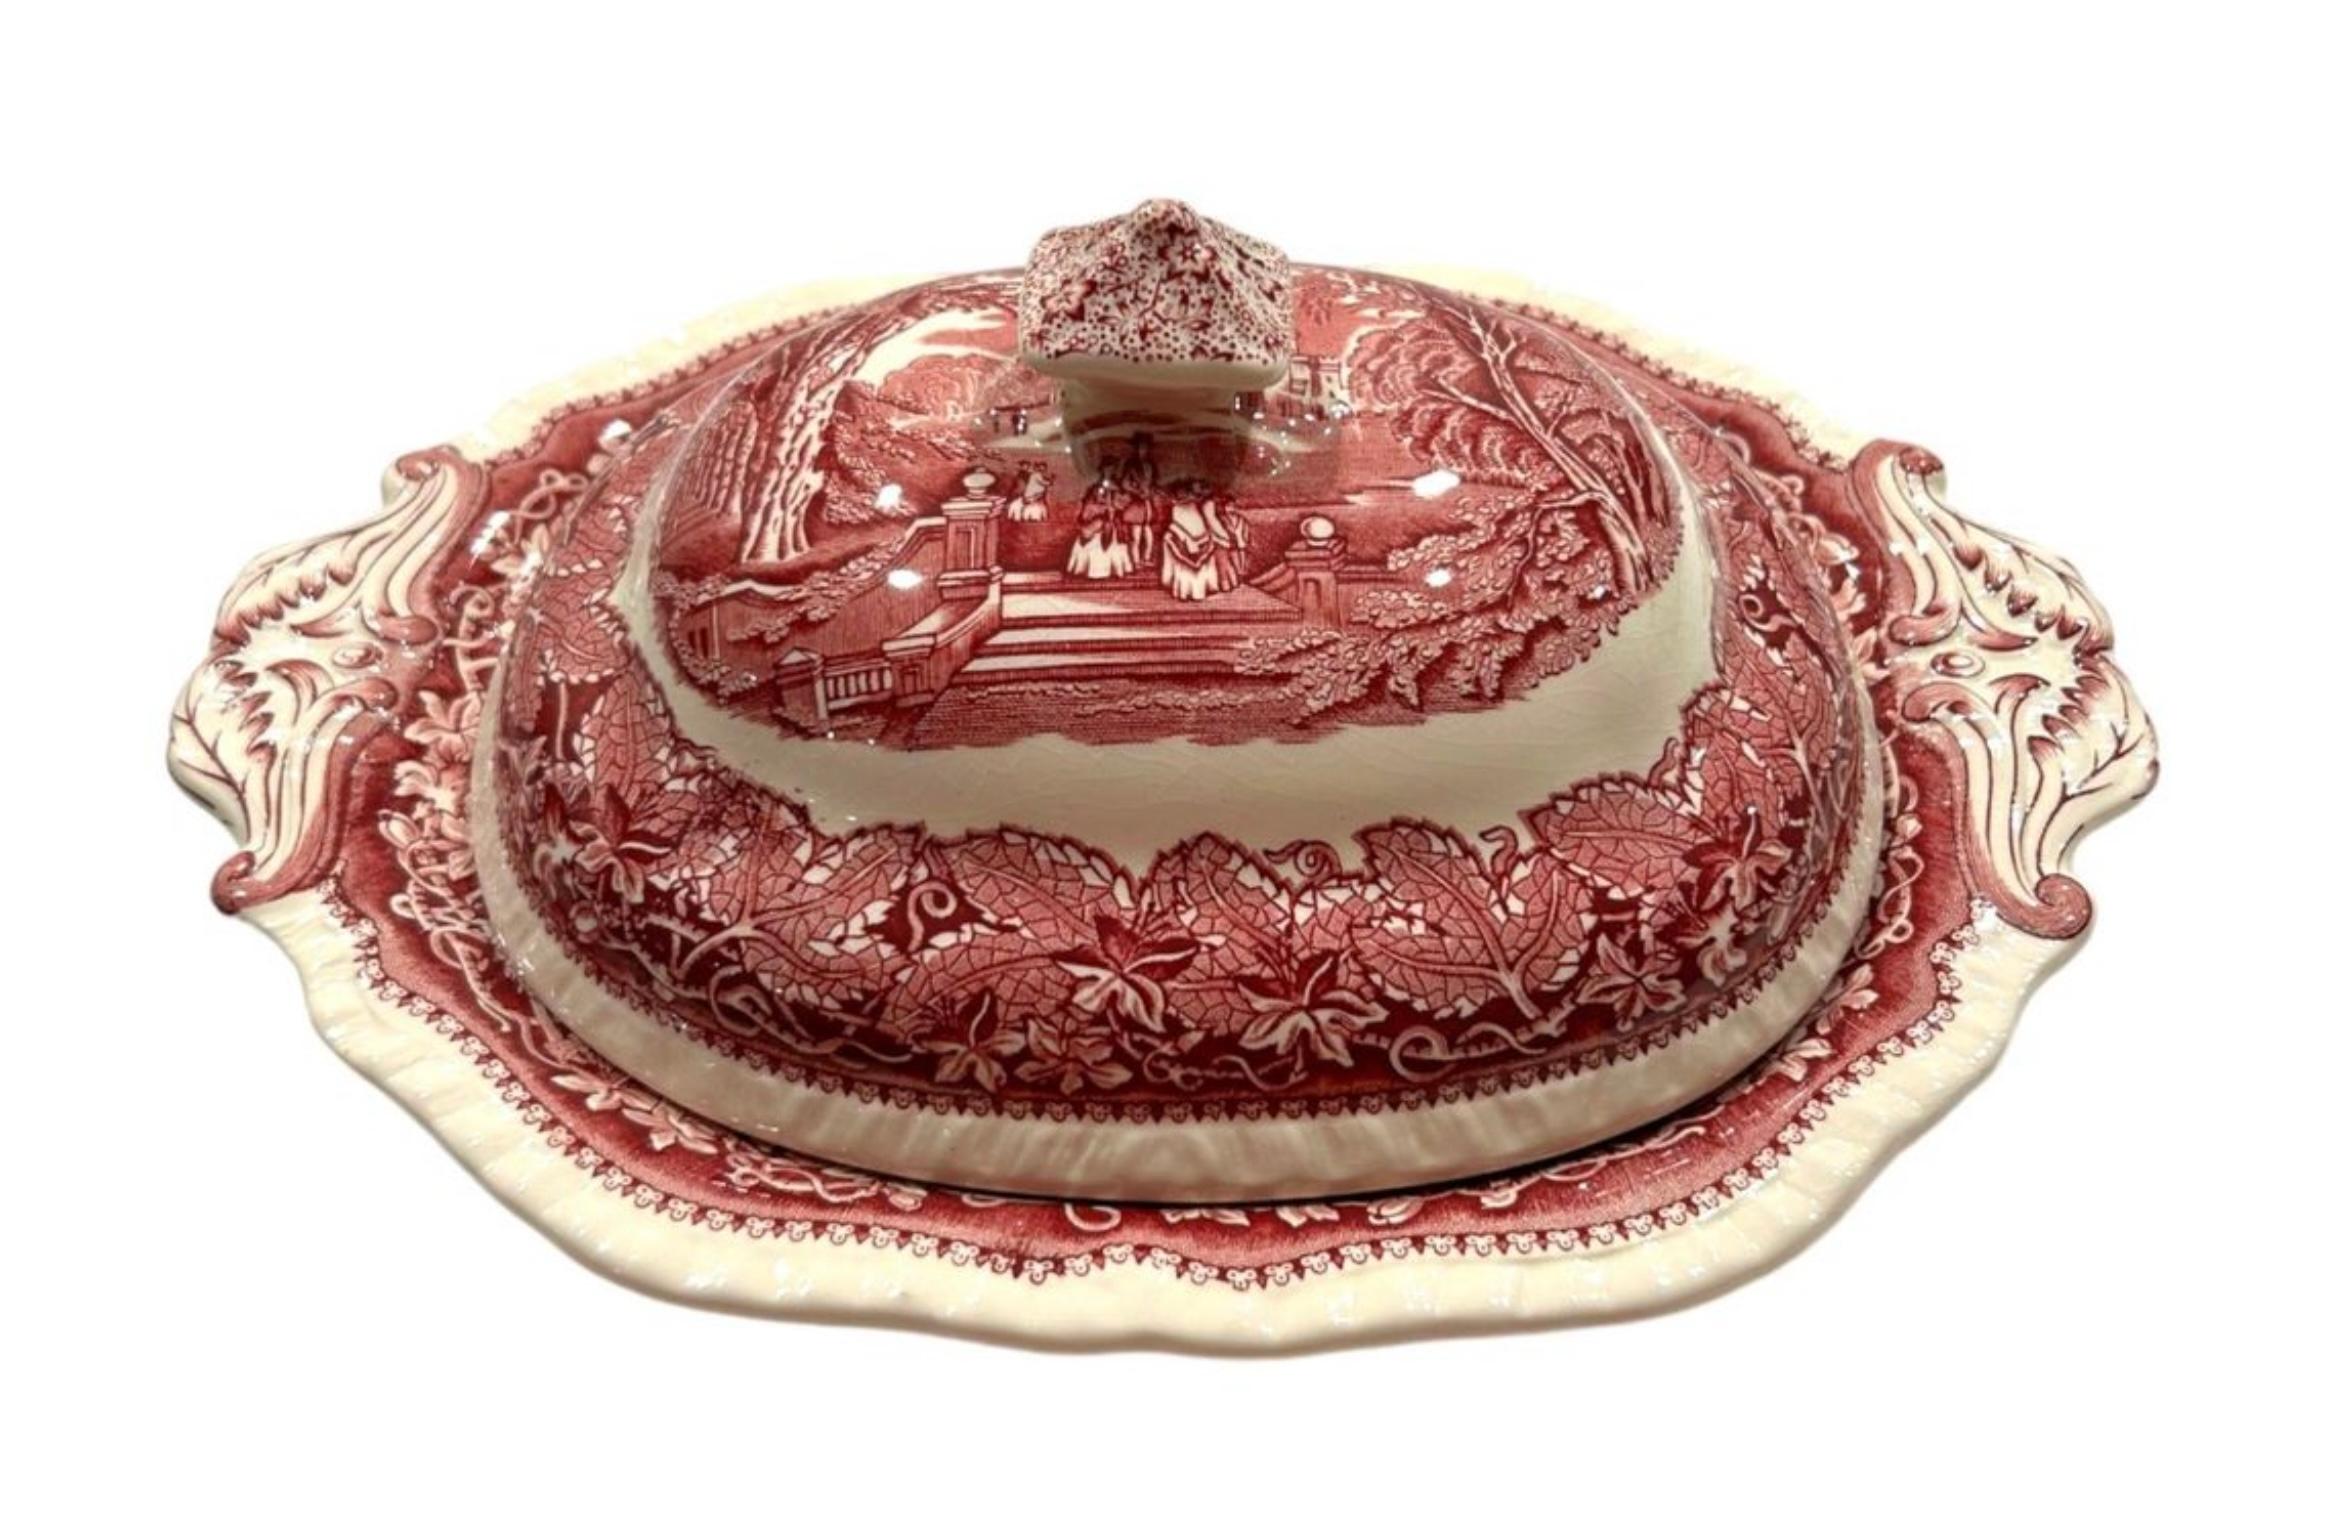 This 1950’s Mason’s oval serving bowl with lid is a beautiful addition to a collection.  Featuring red “Vista” ironstone transferware, this bowl is perfect for serving meals or displaying as decorative cookware.  Made by the renowned Mason’s brand,